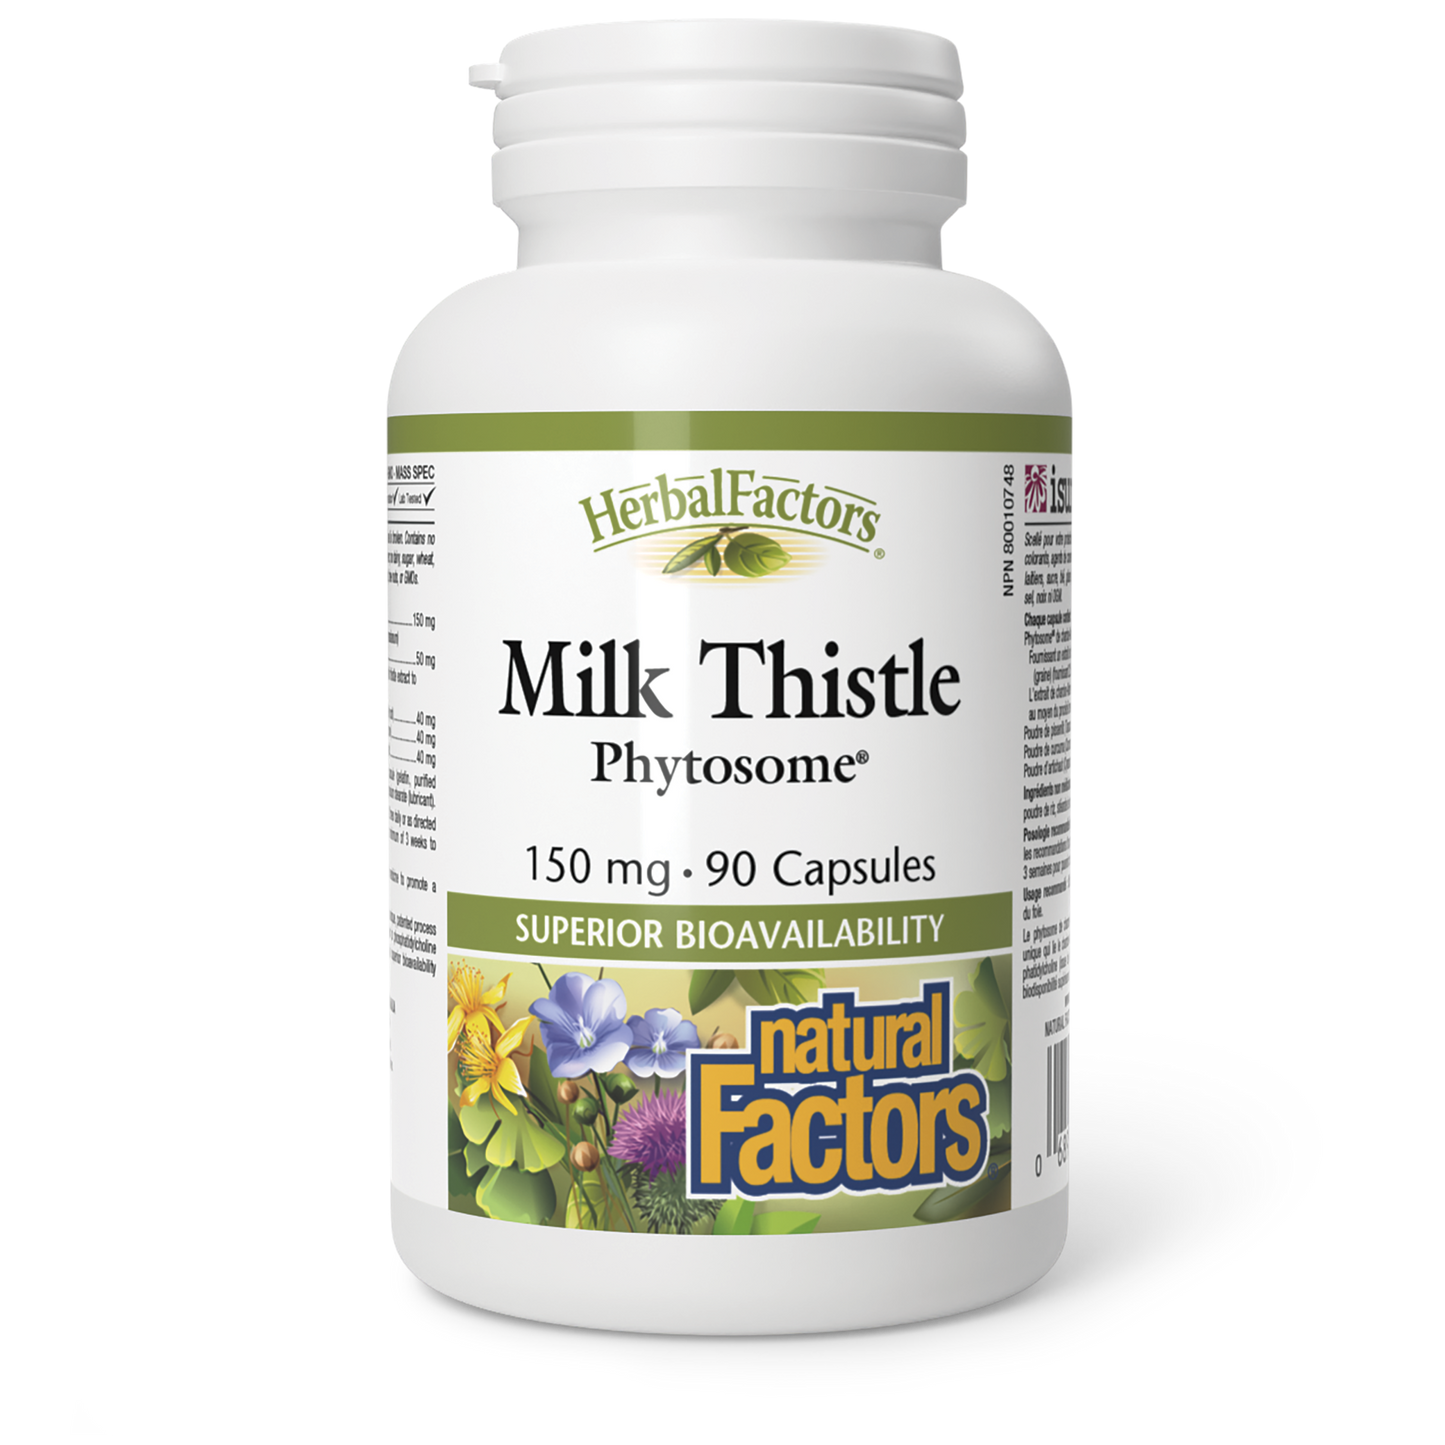 NATURAL FACTORS MILK THISTLE PHYTOSOME